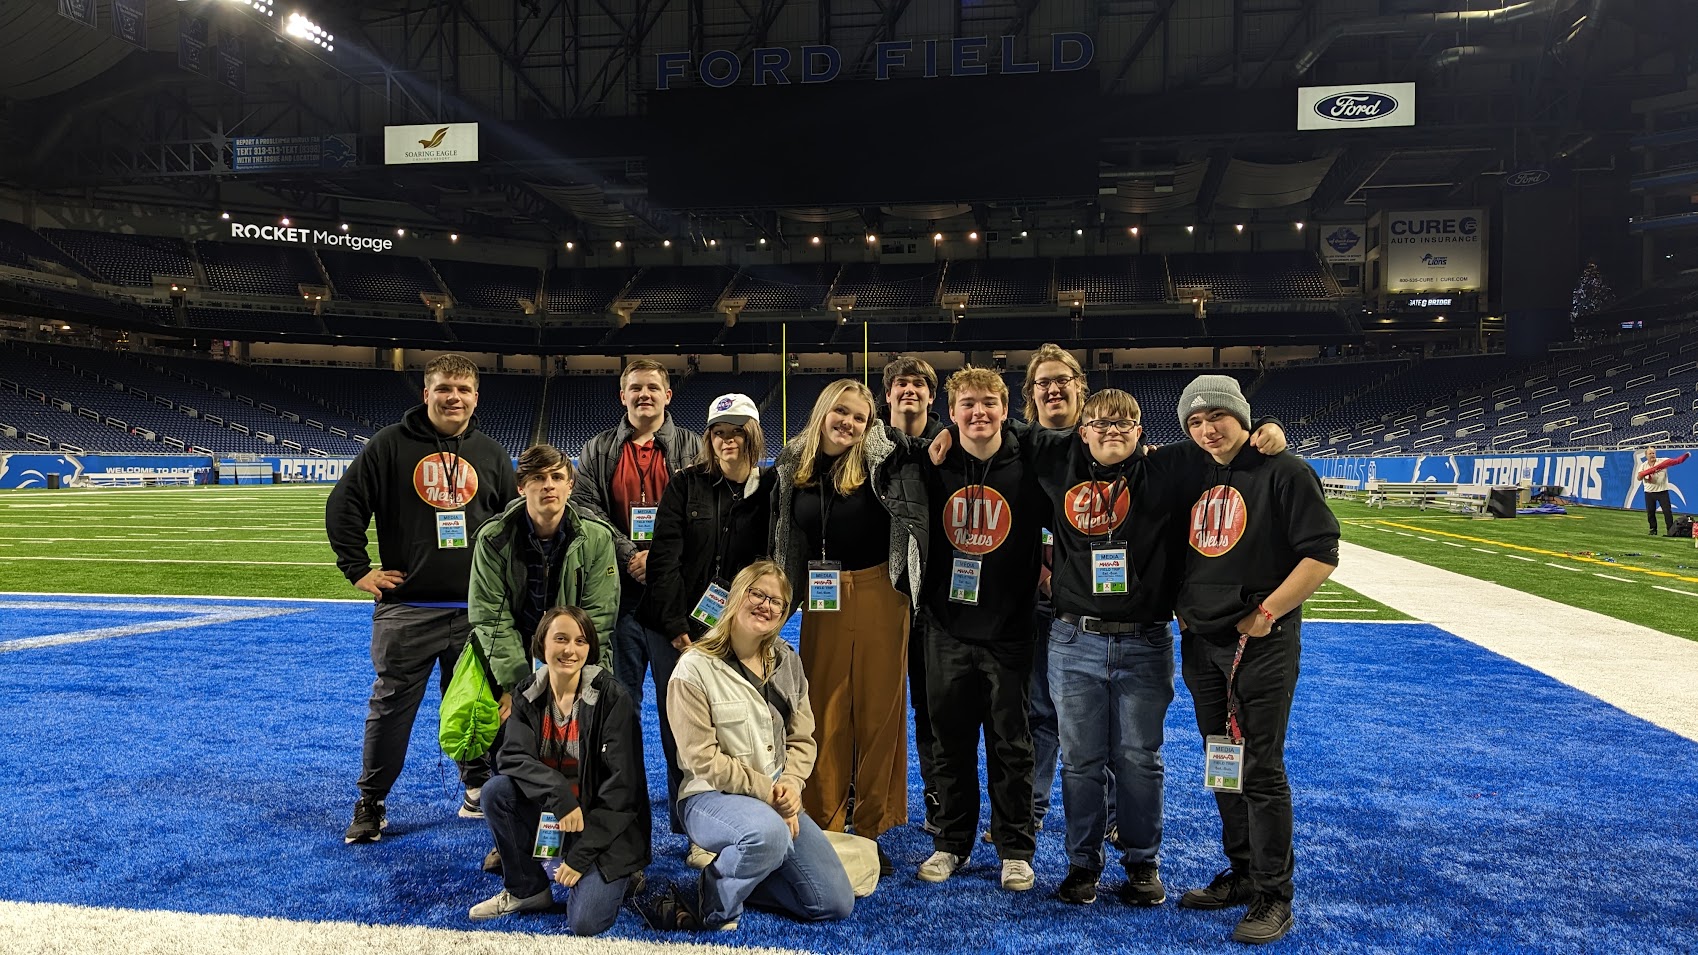 The whole crew at Ford Field